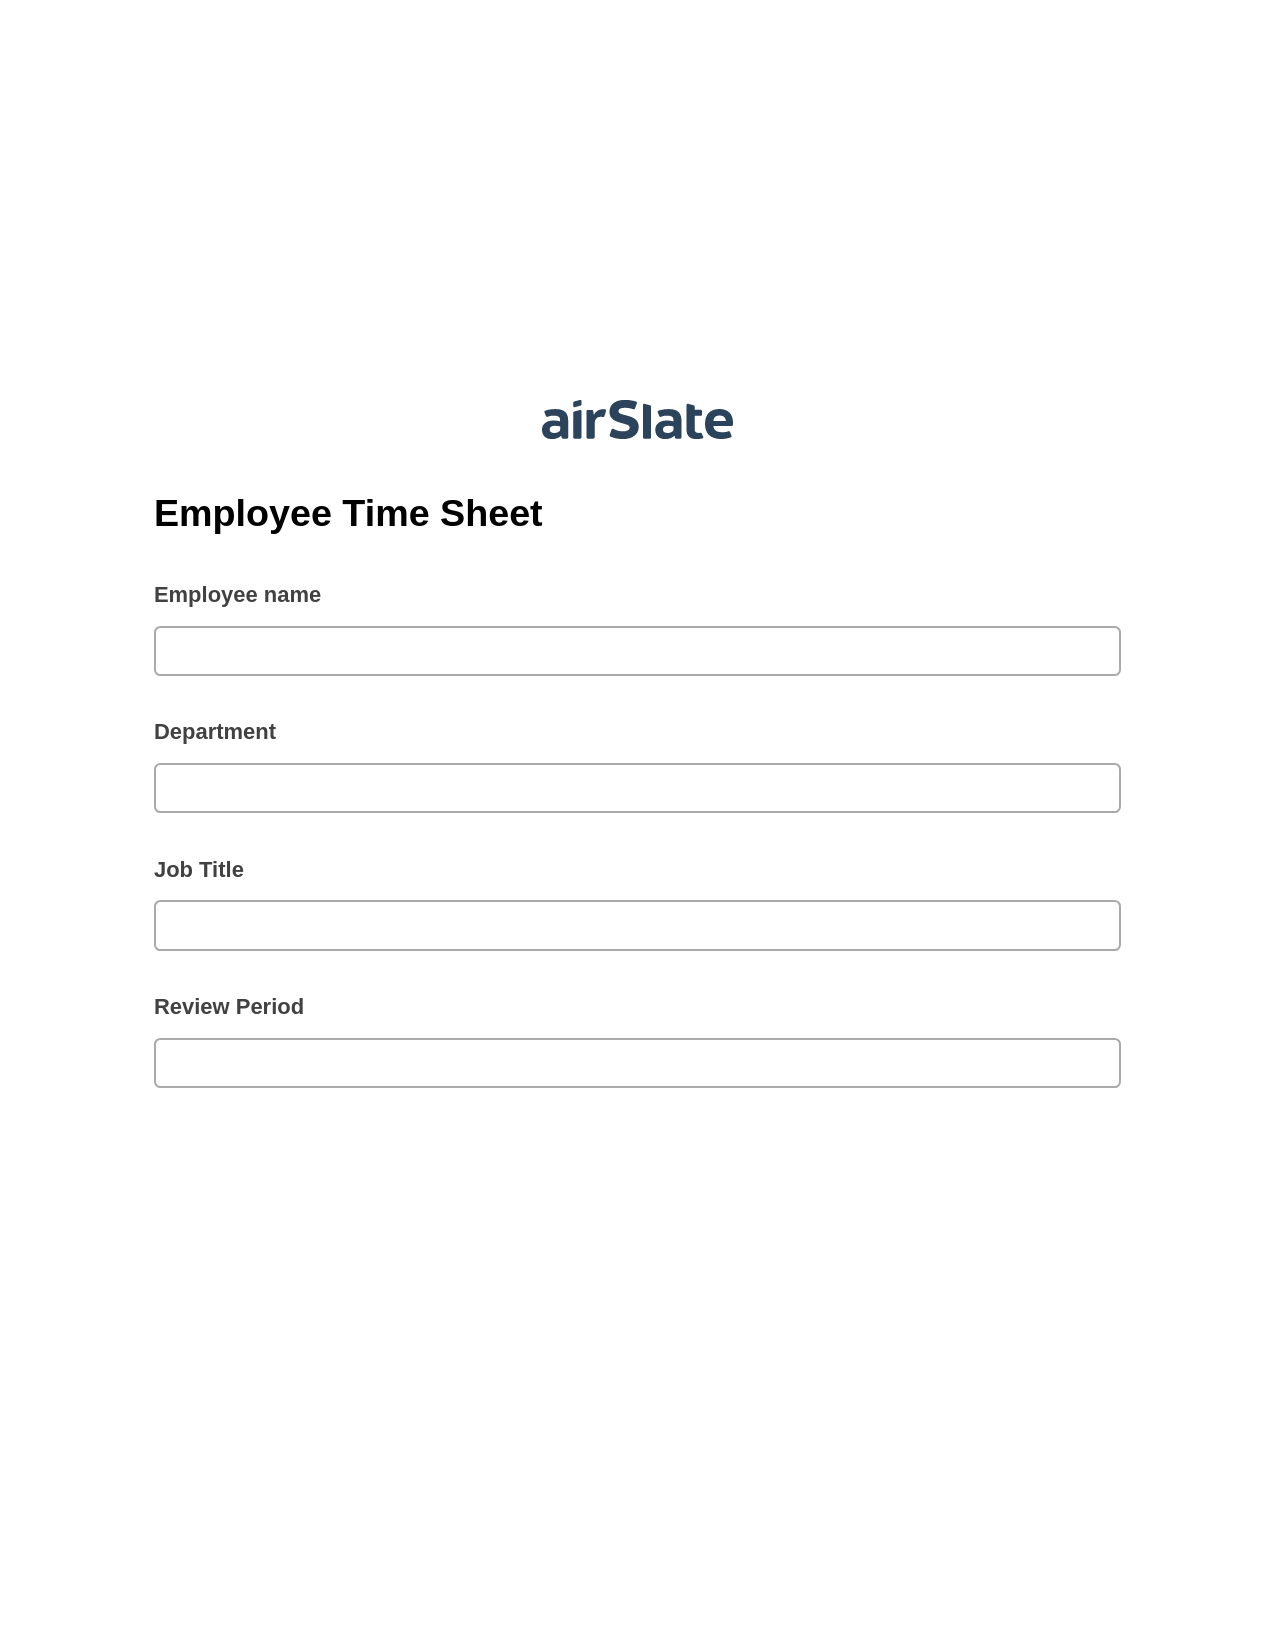 Employee Time Sheet Pre-fill Document Bot, Create slate addon, Archive to Google Drive Bot